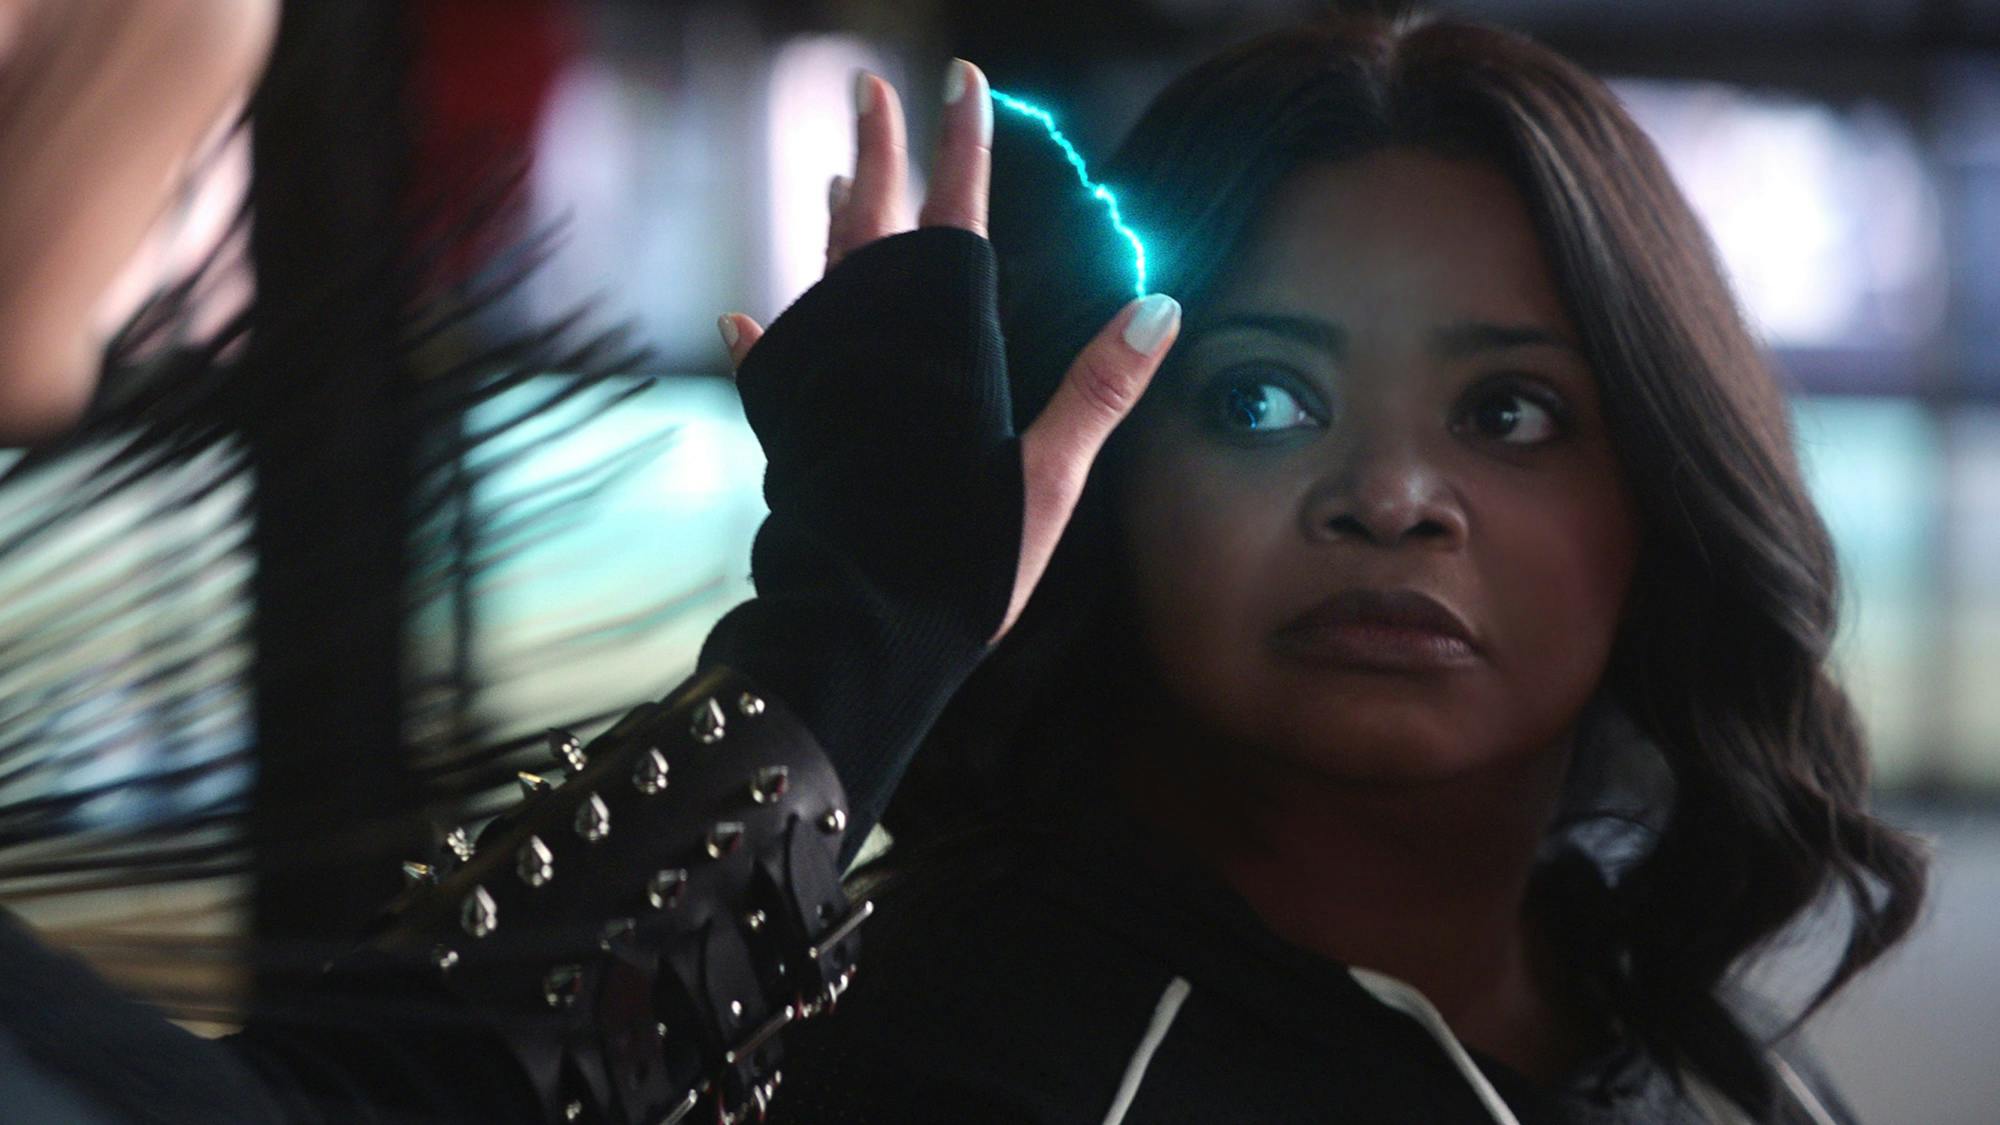 Octavia Spencer looks into a mirror as a bolt of lightning flashes between her fingers. She wears a studded cuff and appears serious. 